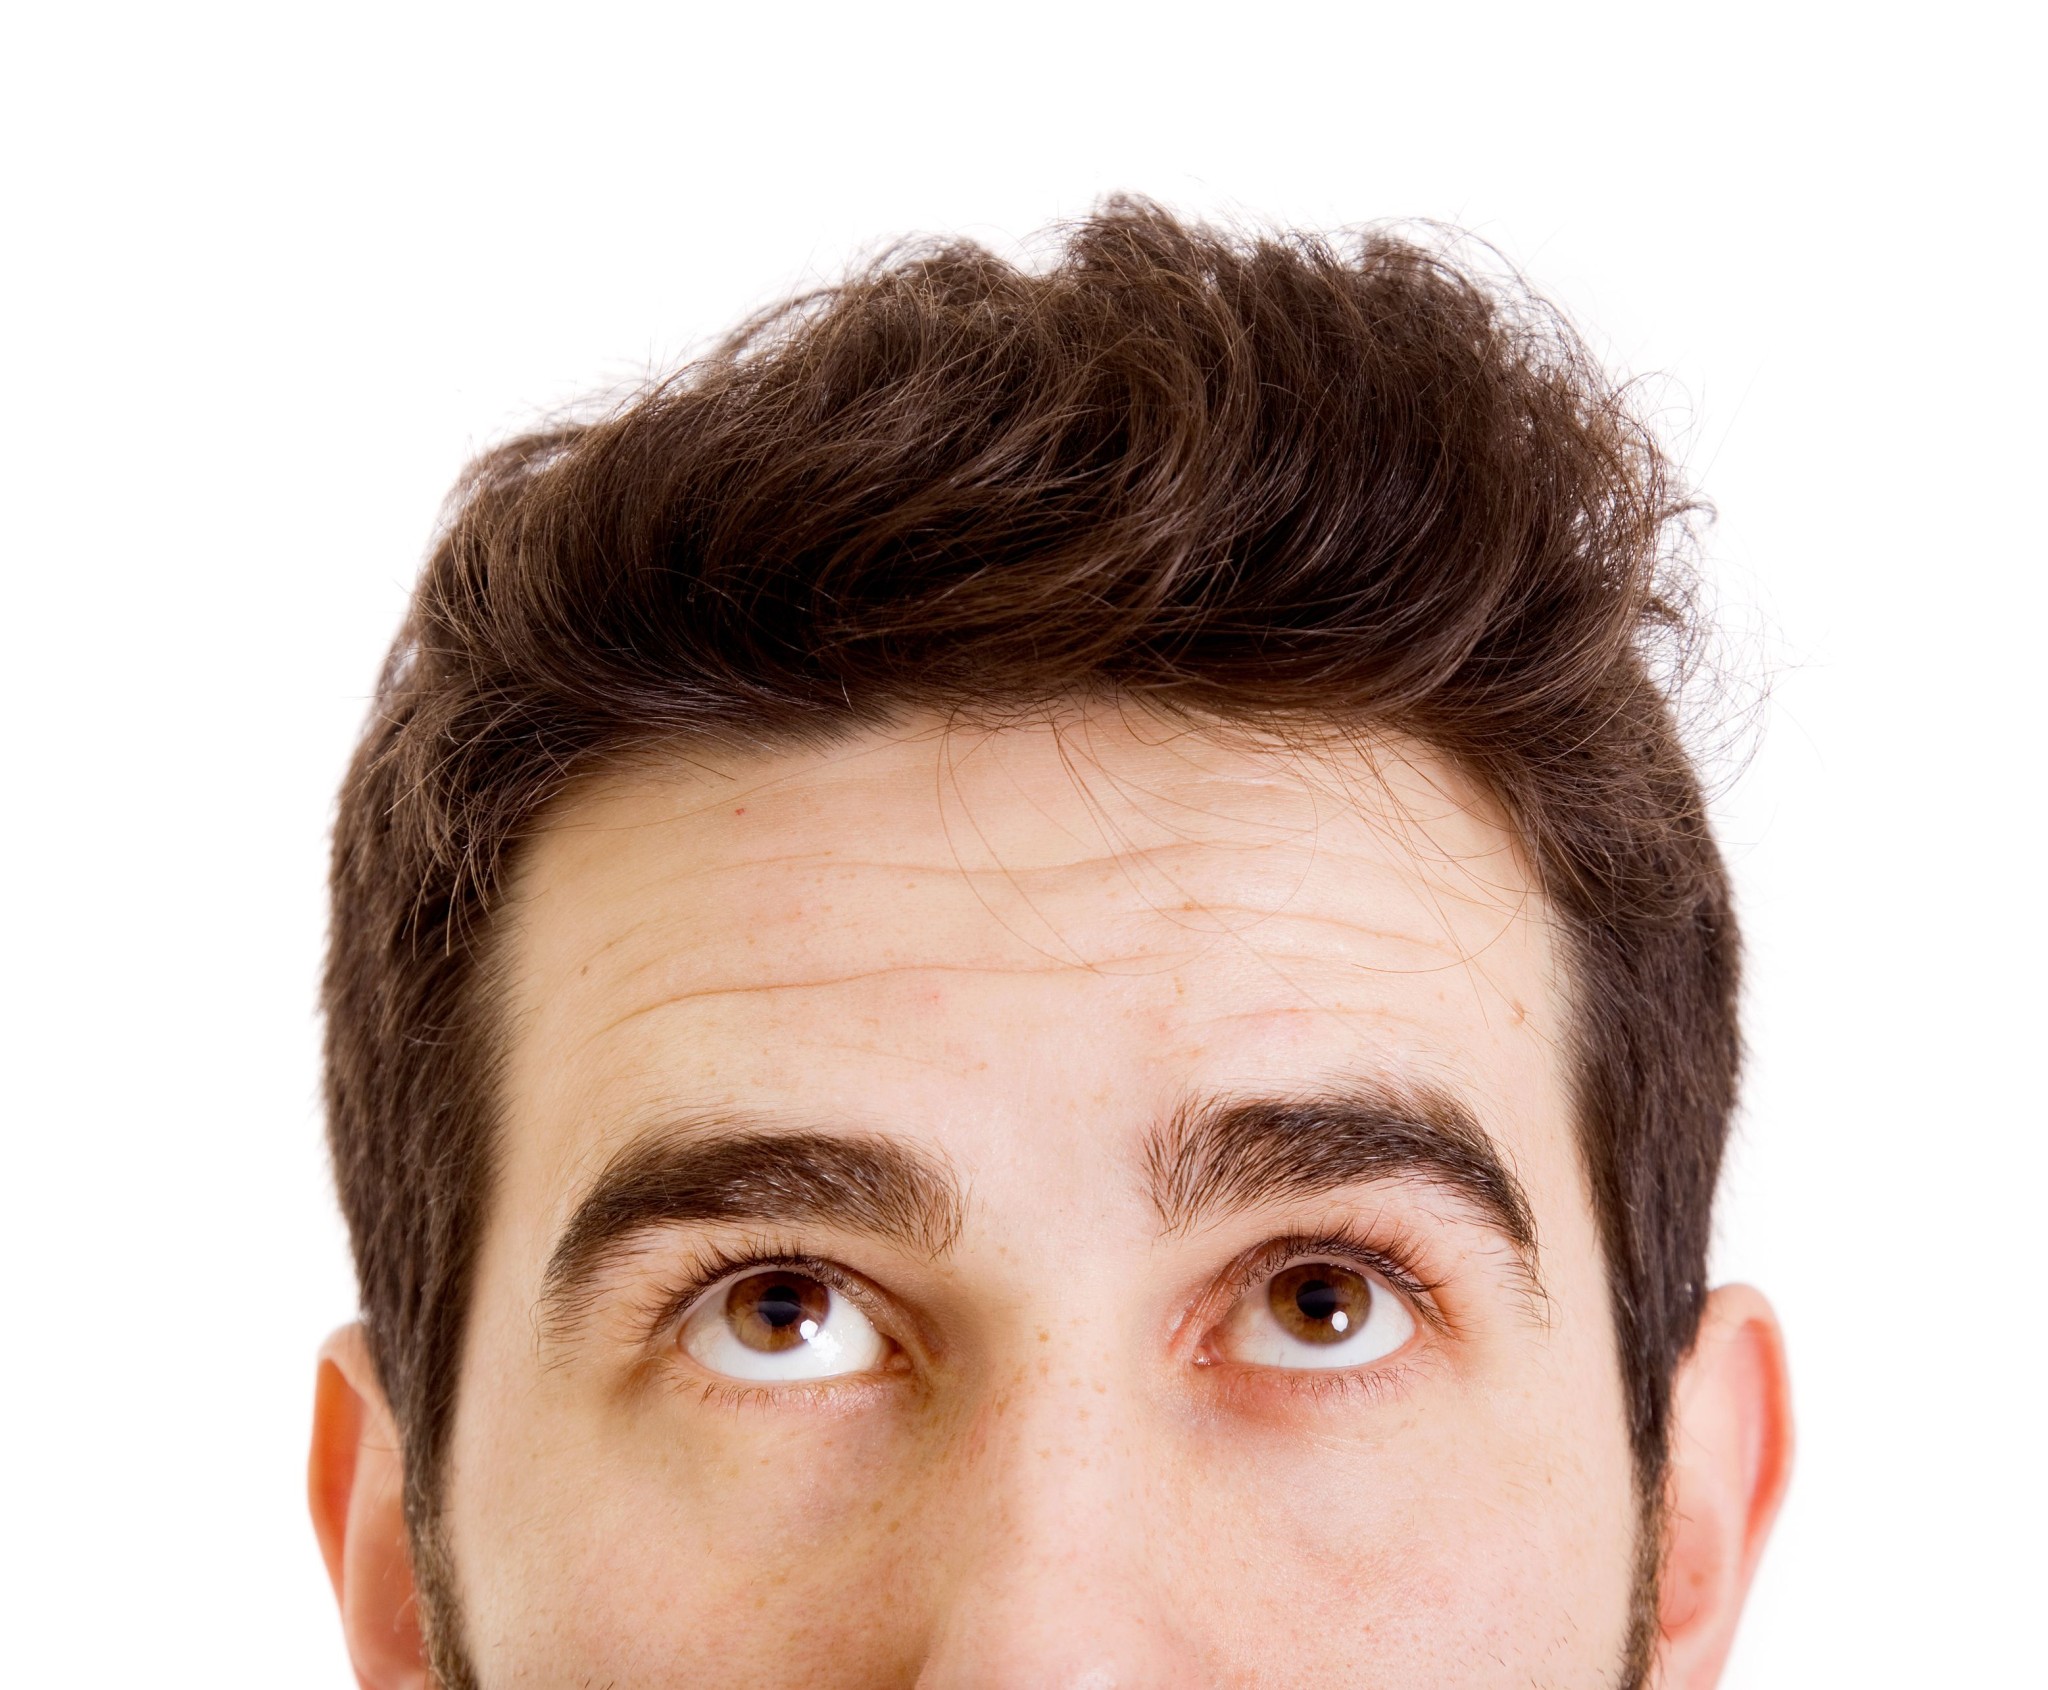 What You Can Do About Male Pattern Hair Loss